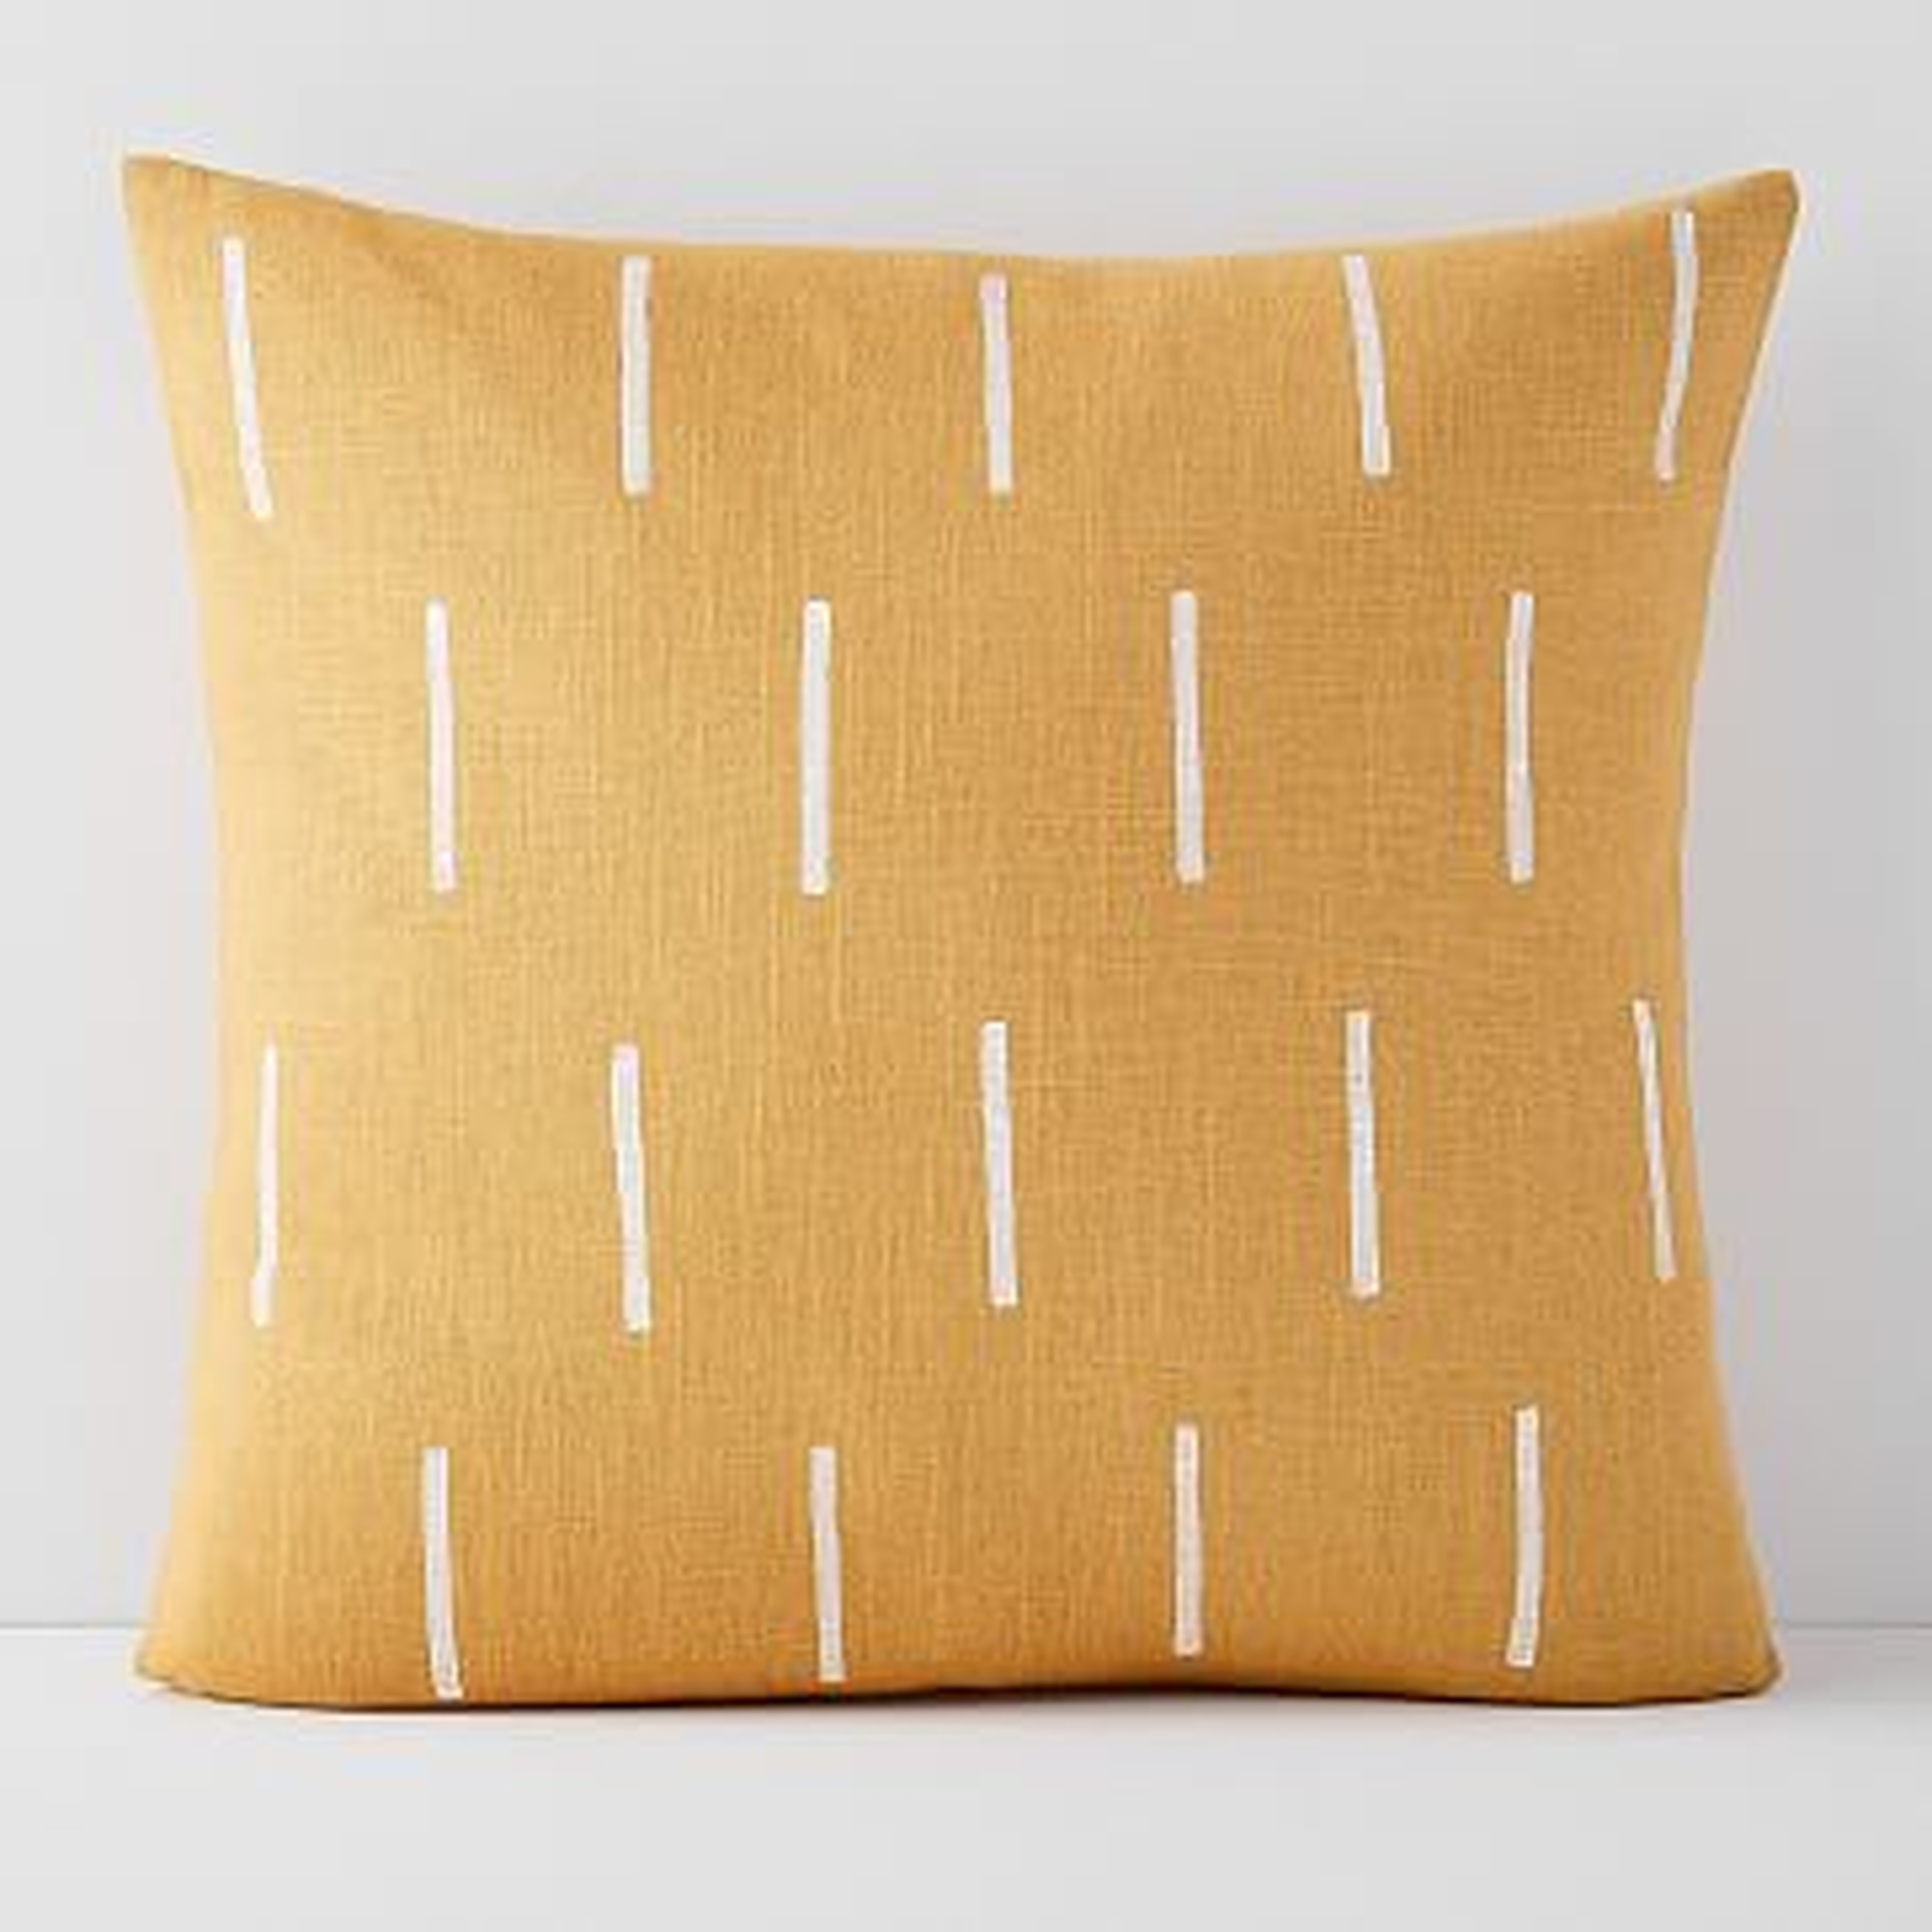 Flax + Symbol Pillow Cover, Mustard Lines - West Elm